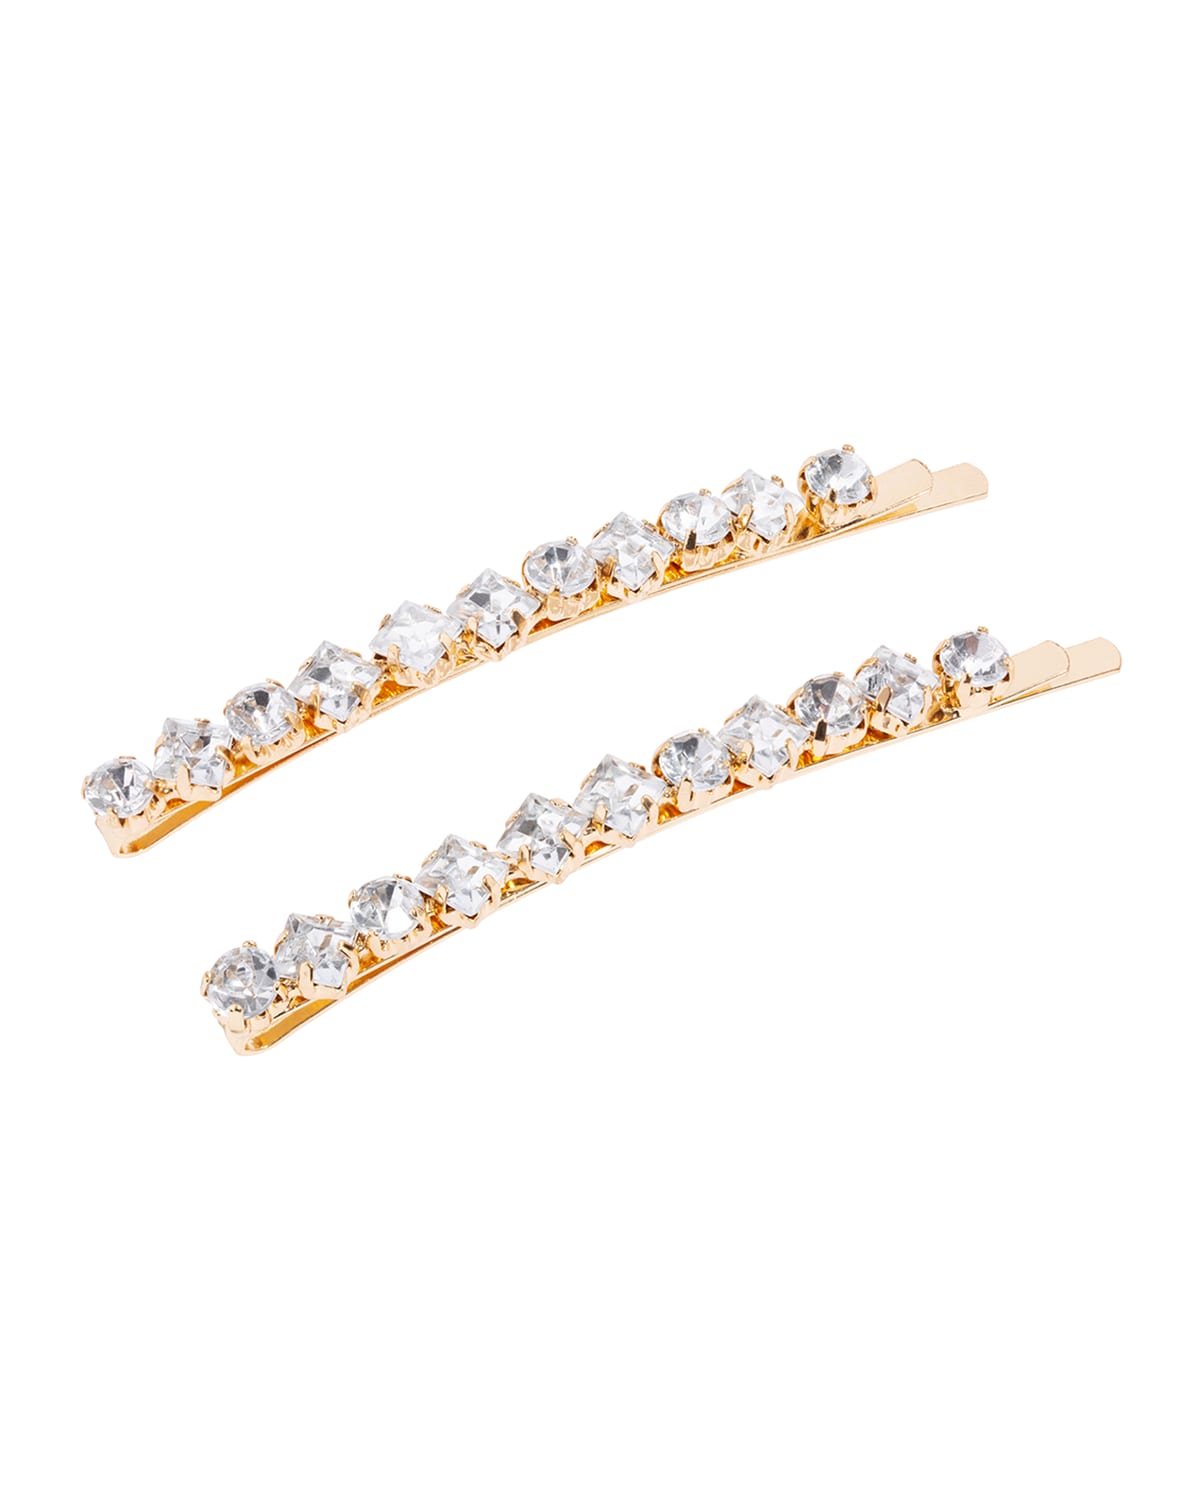 L Erickson Crystal Bobby Pins, Set Of 2 In Crystal / Gold